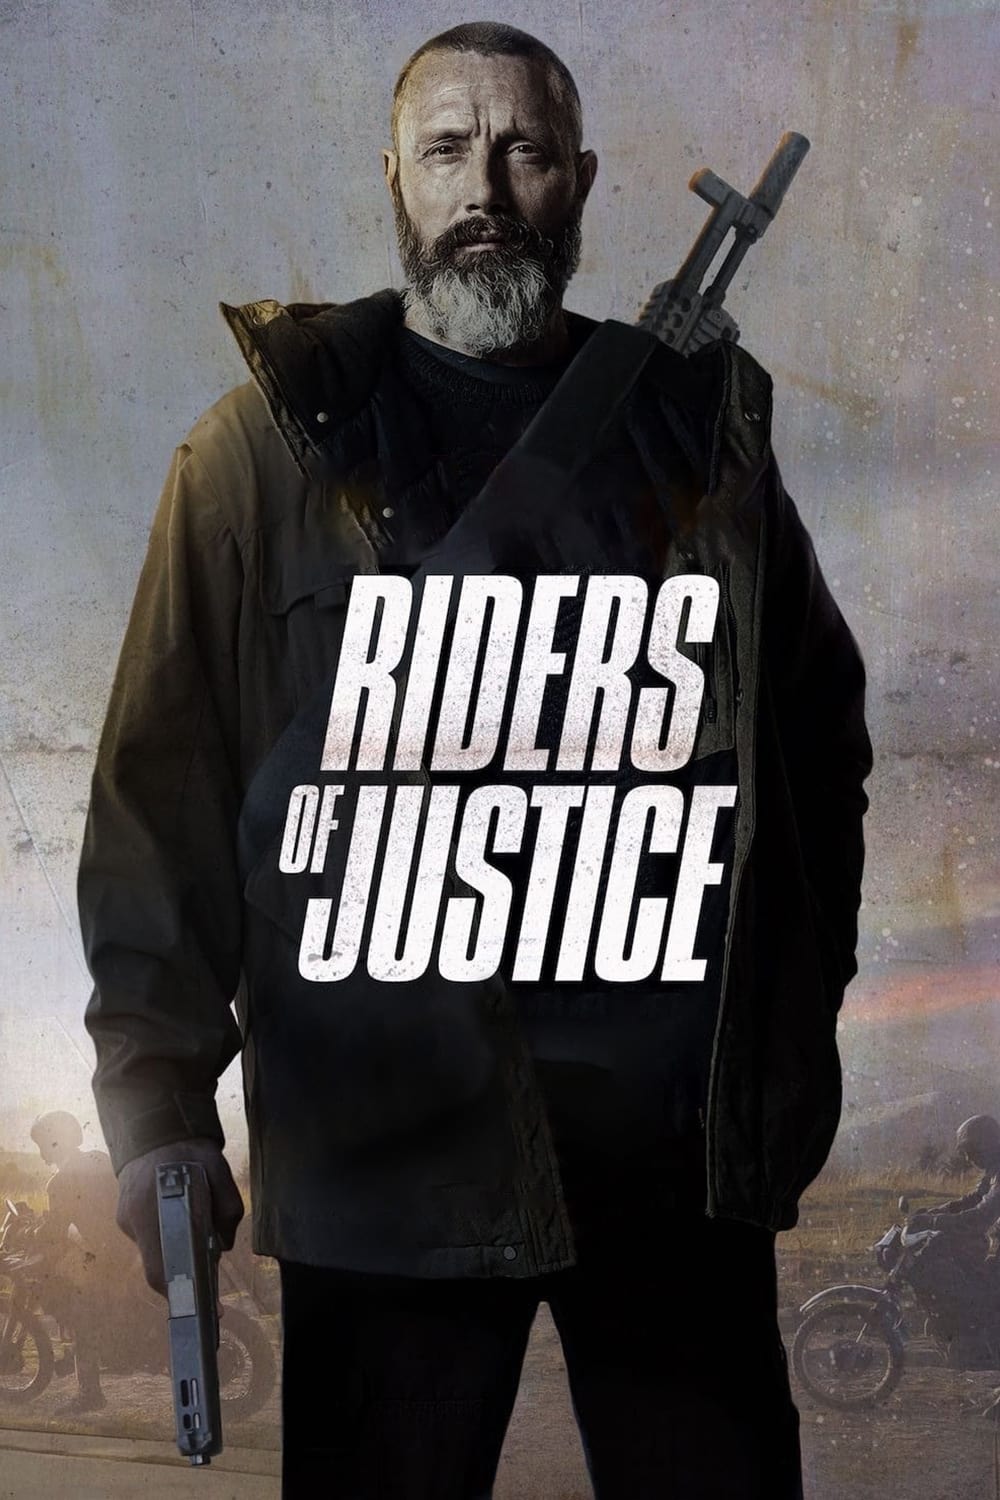 Poster for the movie "Riders of Justice"